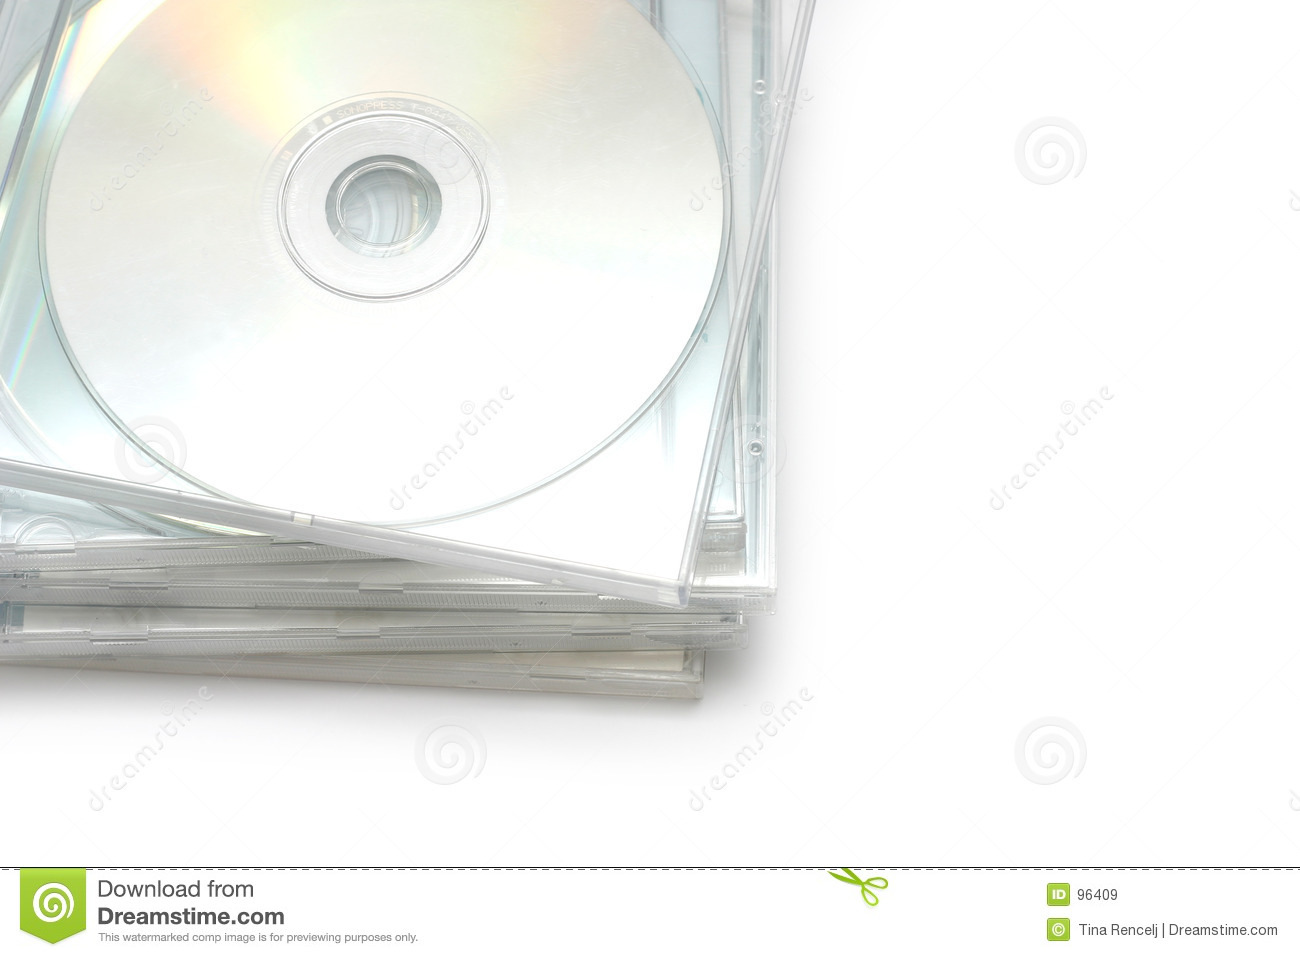 Cd Jewel Case Stack Ii Royalty Free Stock Images   Image  96409